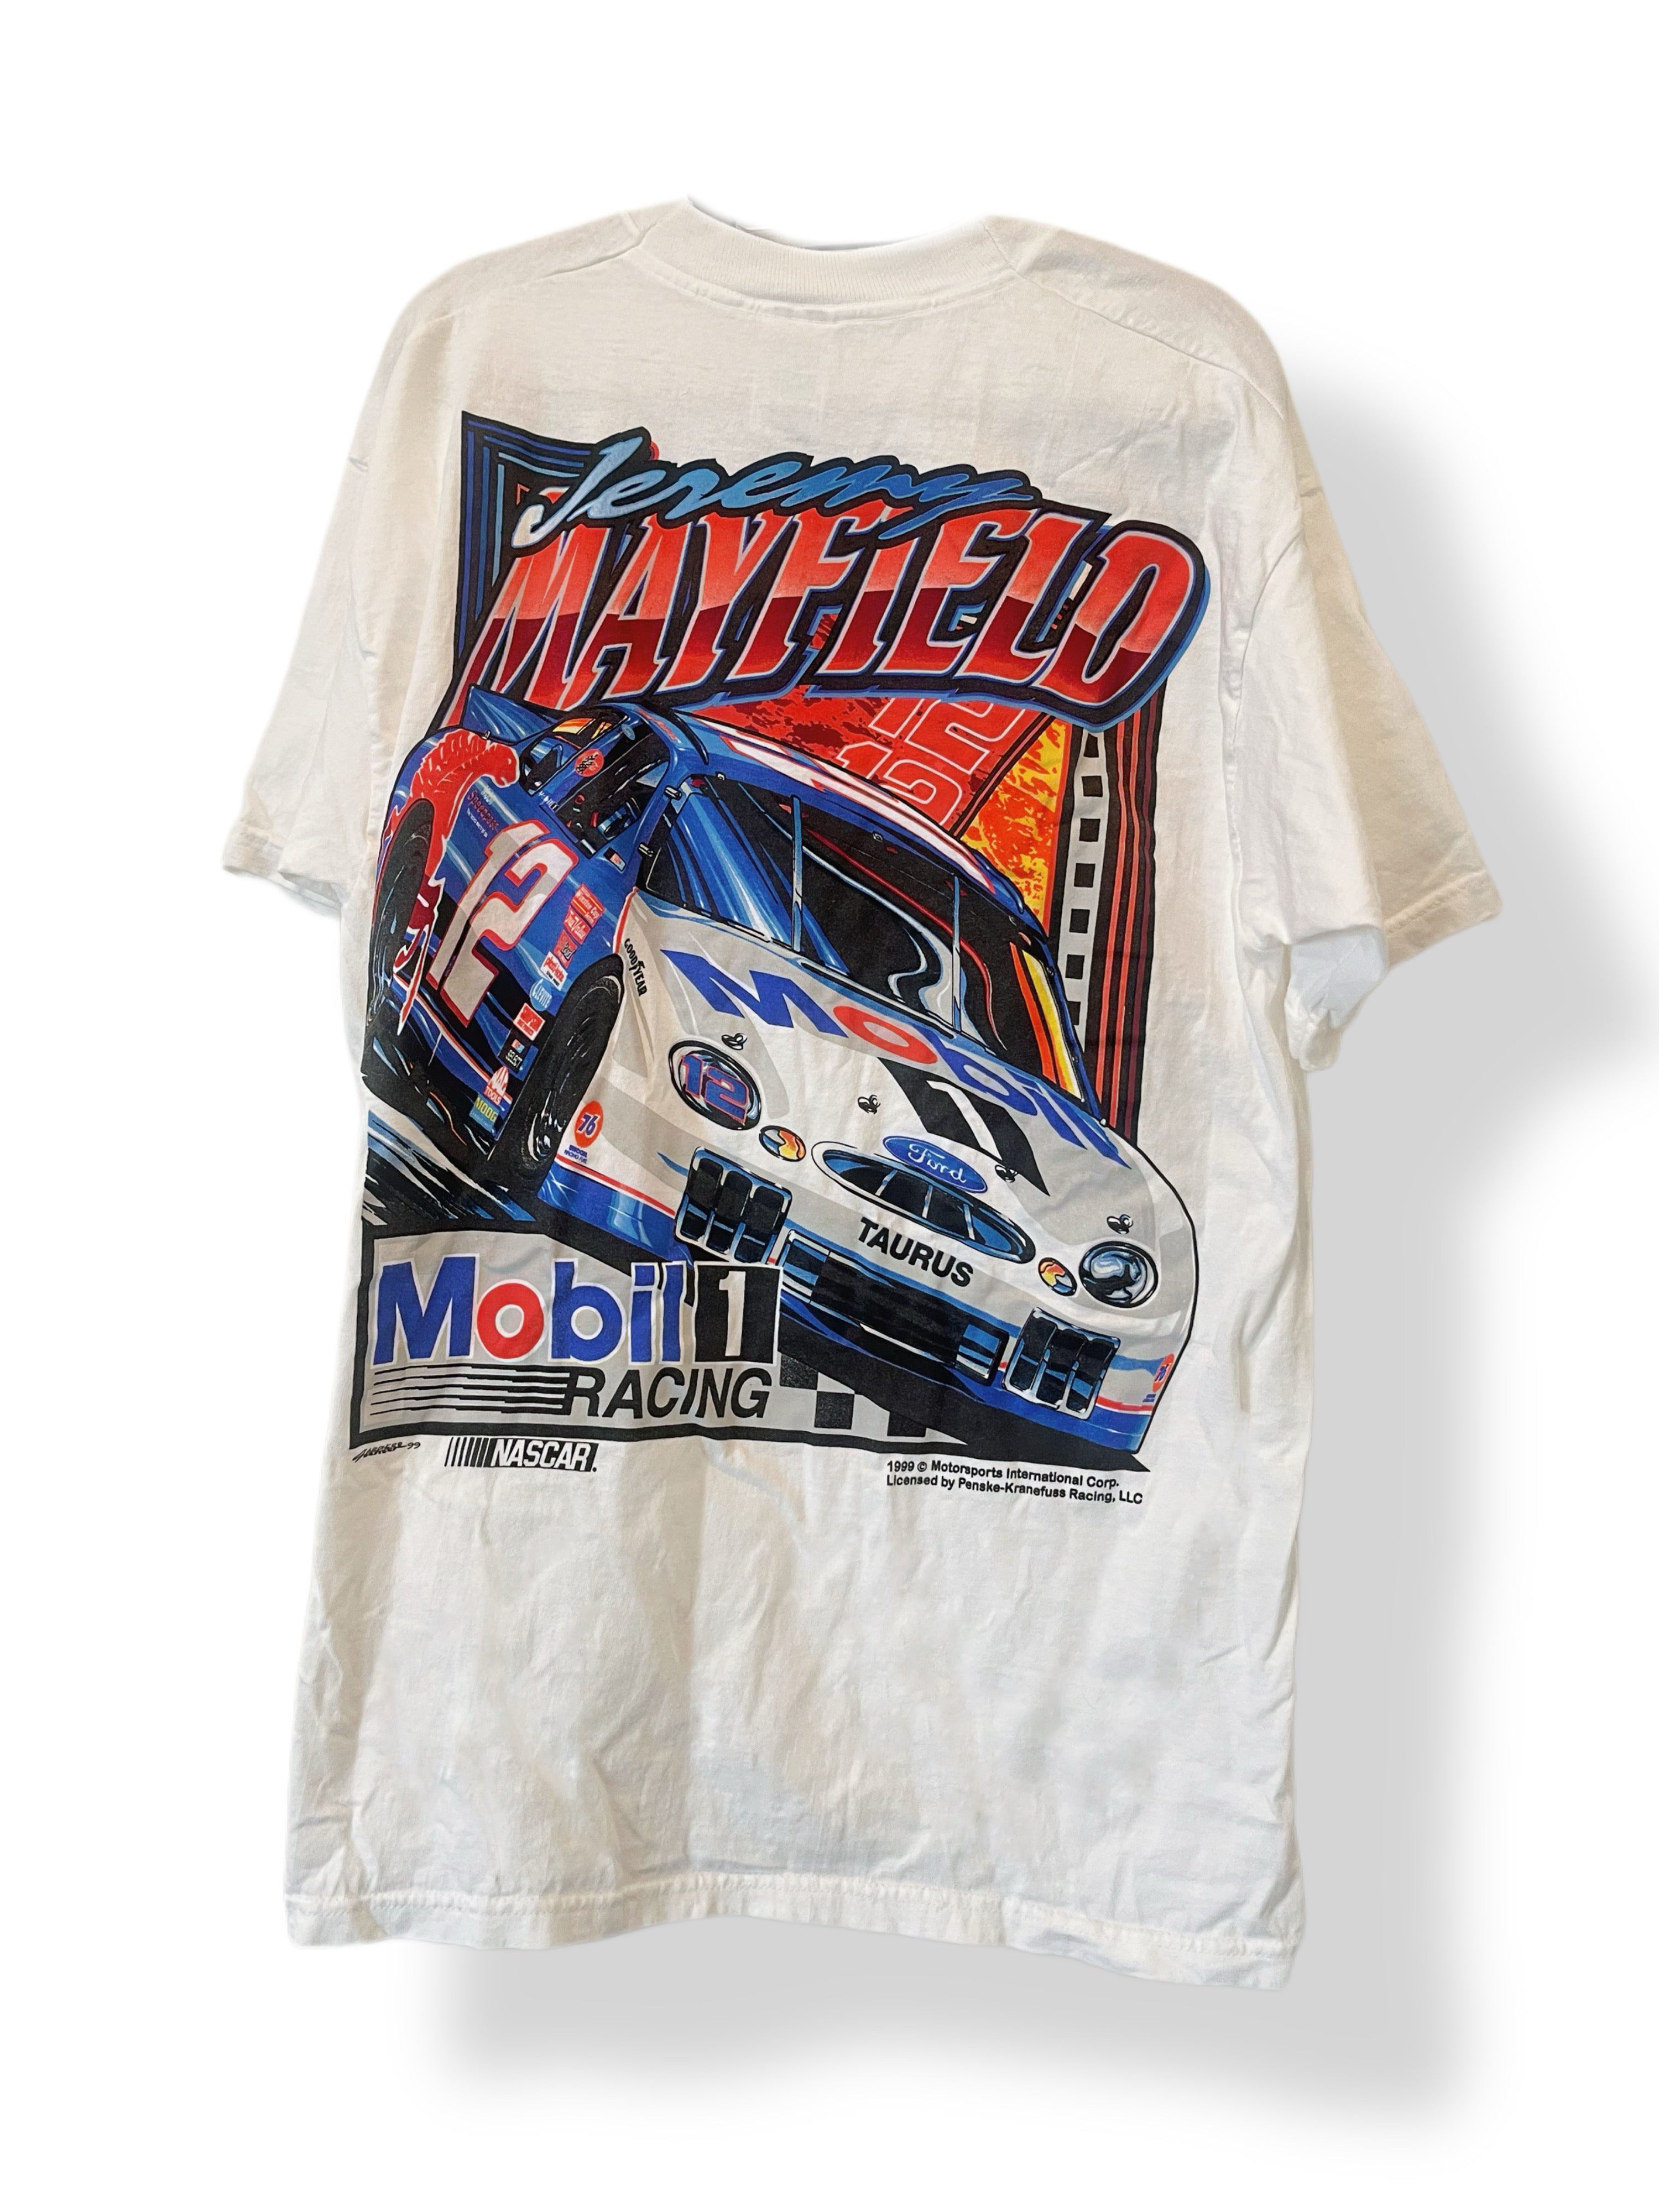 VINTAGE 90’S JEREMY MAYFIELD MOBIL RACING TEE